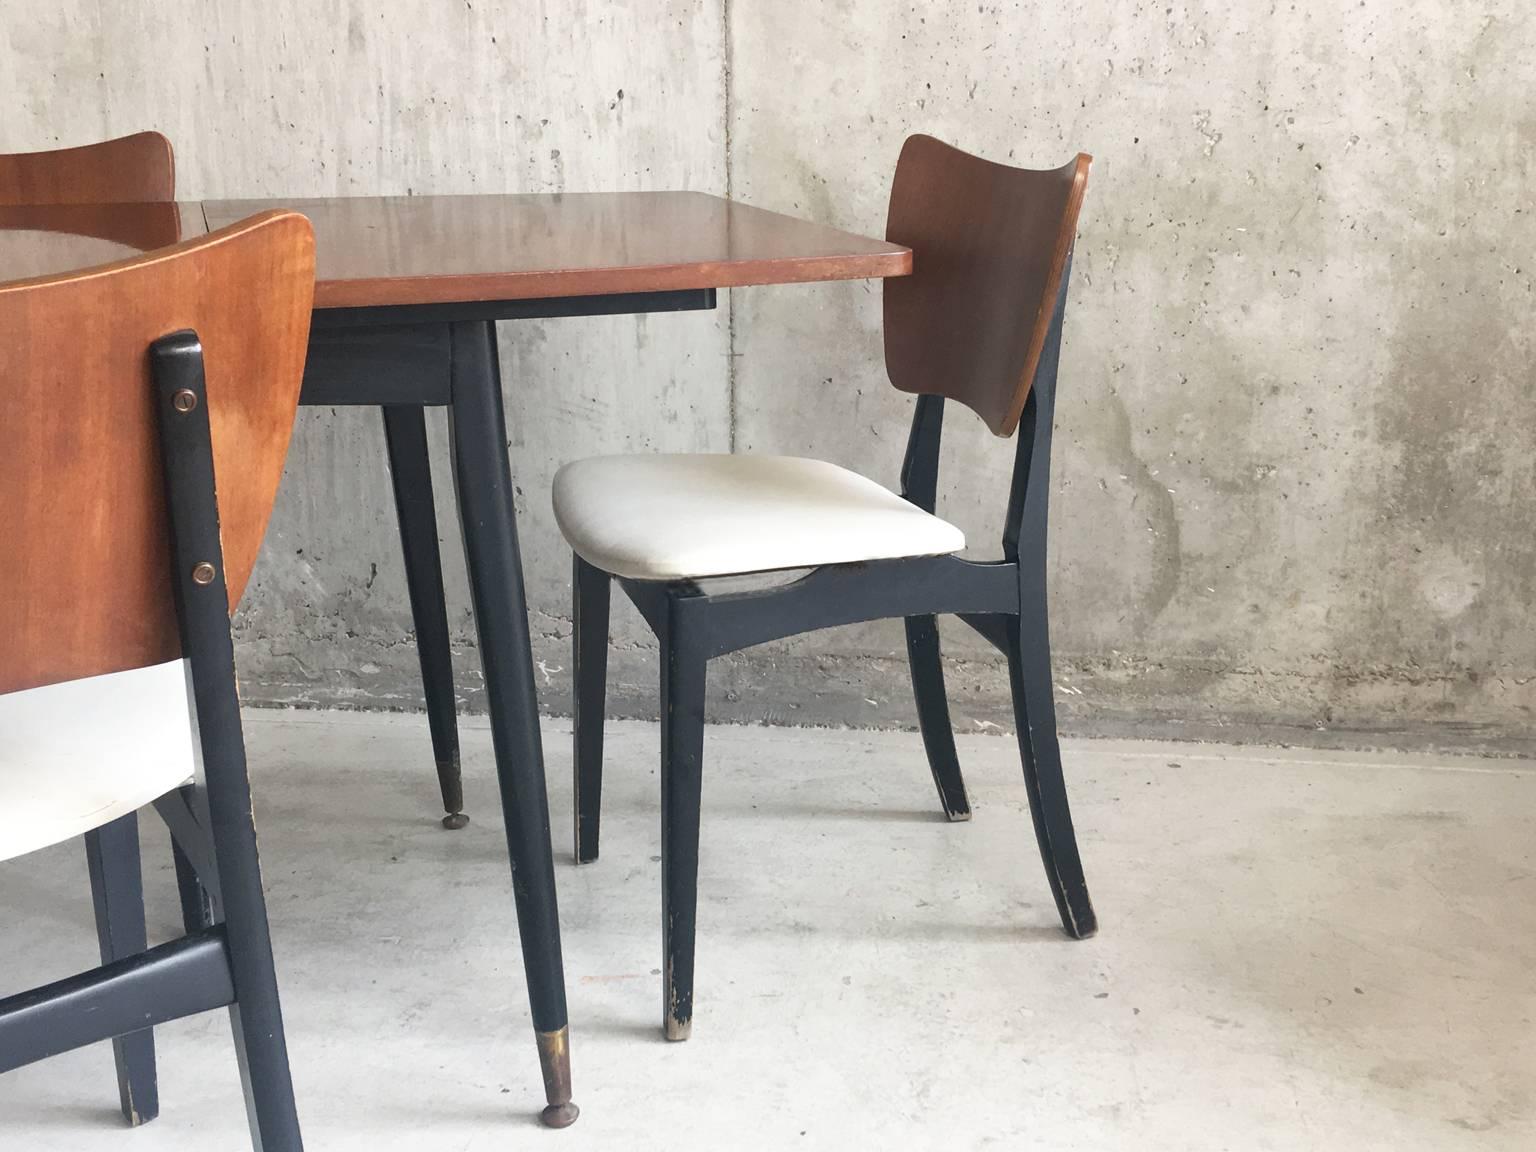 1960s dining table and chairs for sale